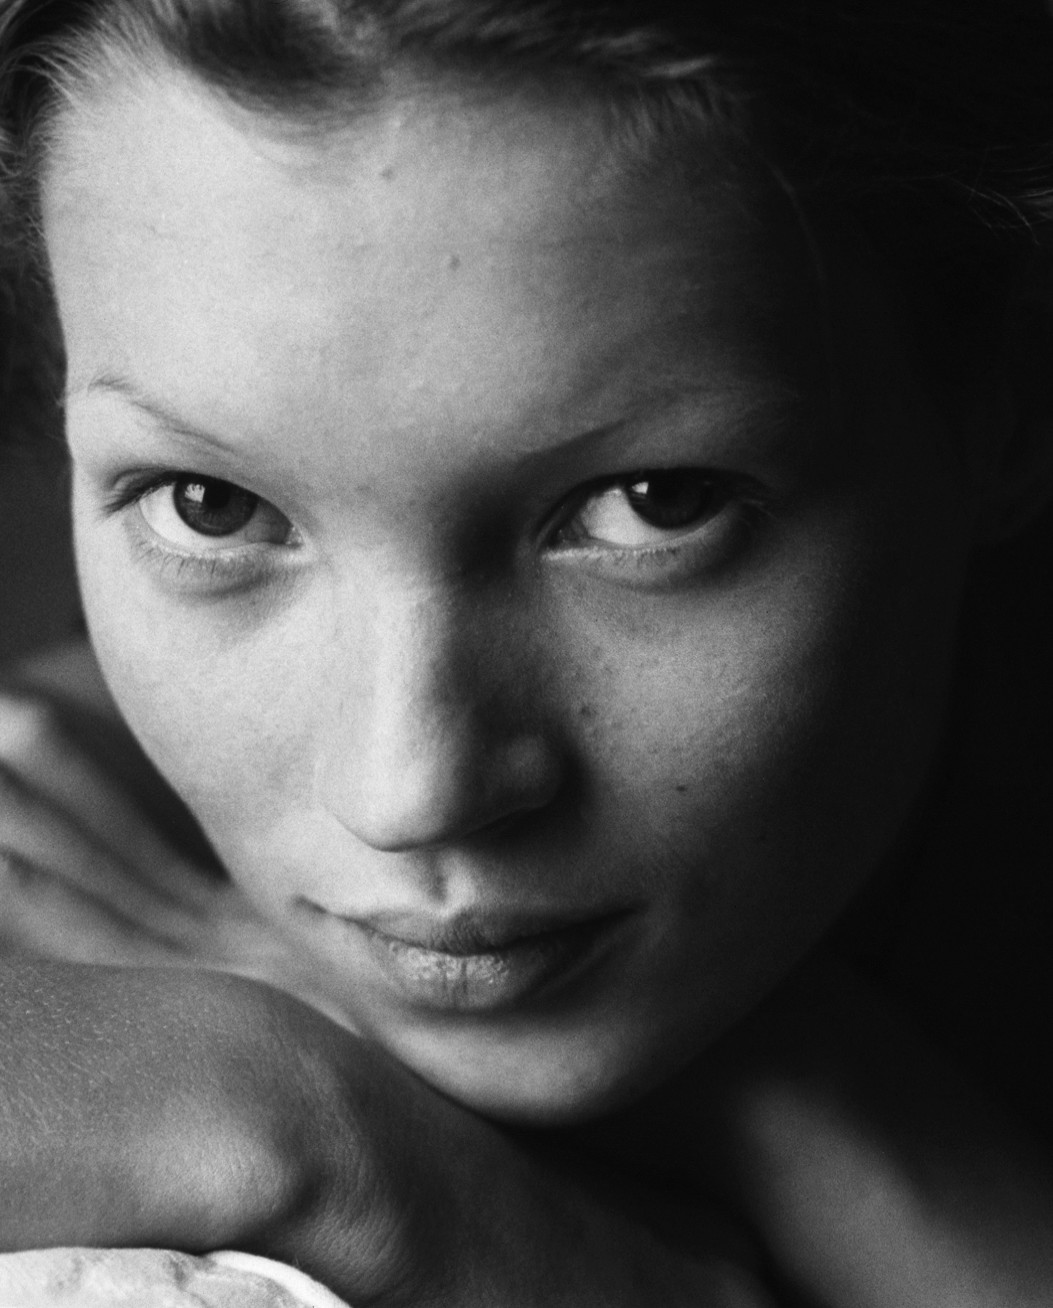 Kate Moss in the 90s: A Look Back at Her Early Career - The Front Row View